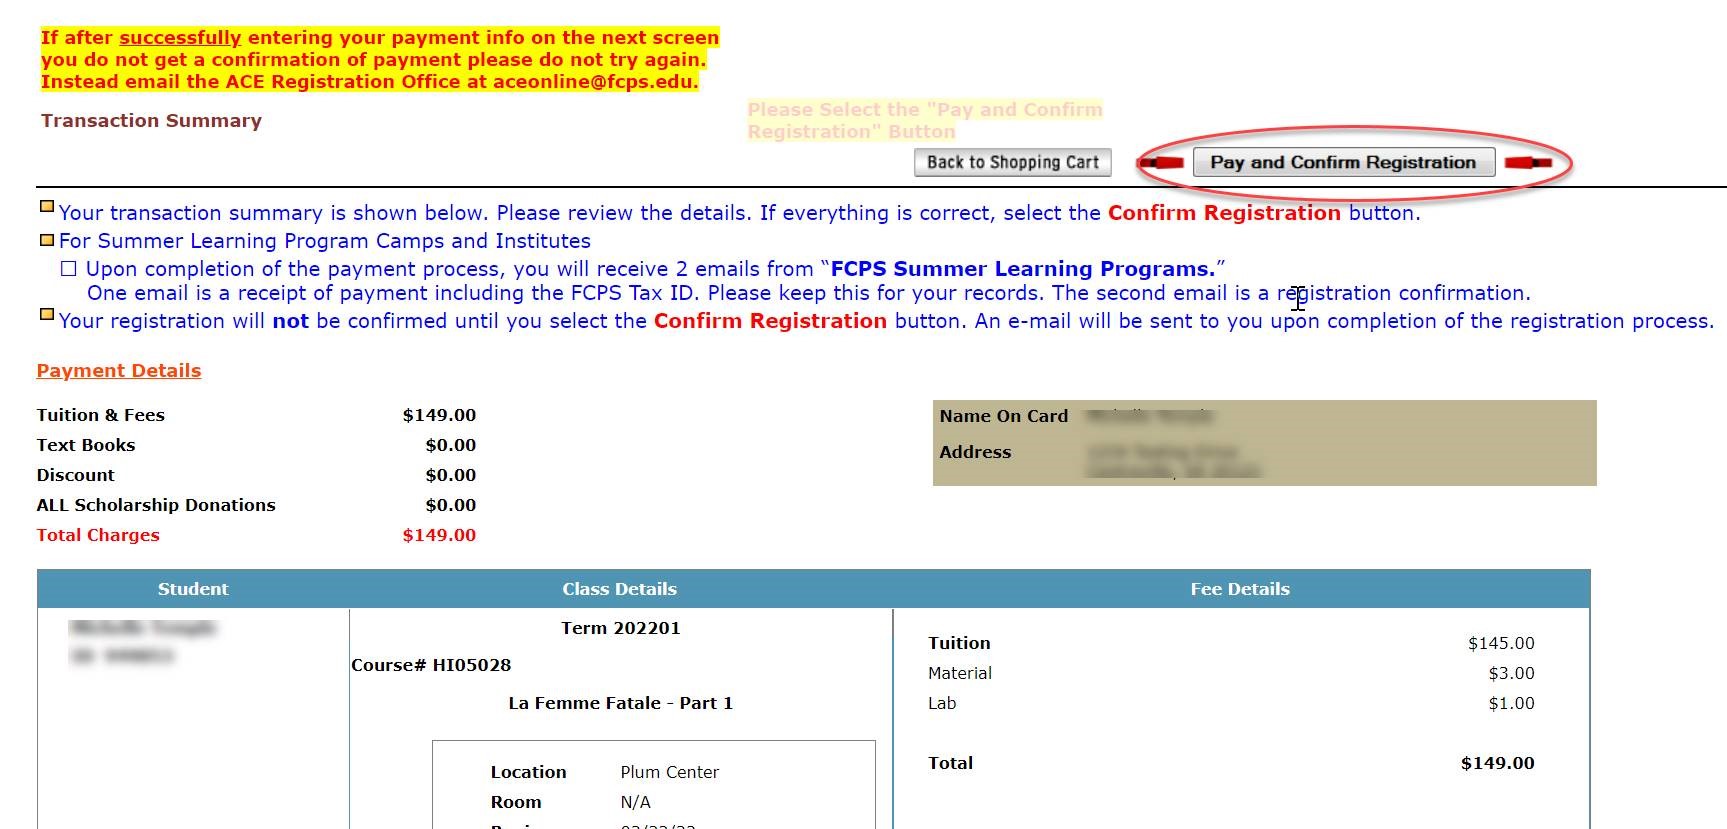 screenshot of the Pay and Confirm registration button circled in red